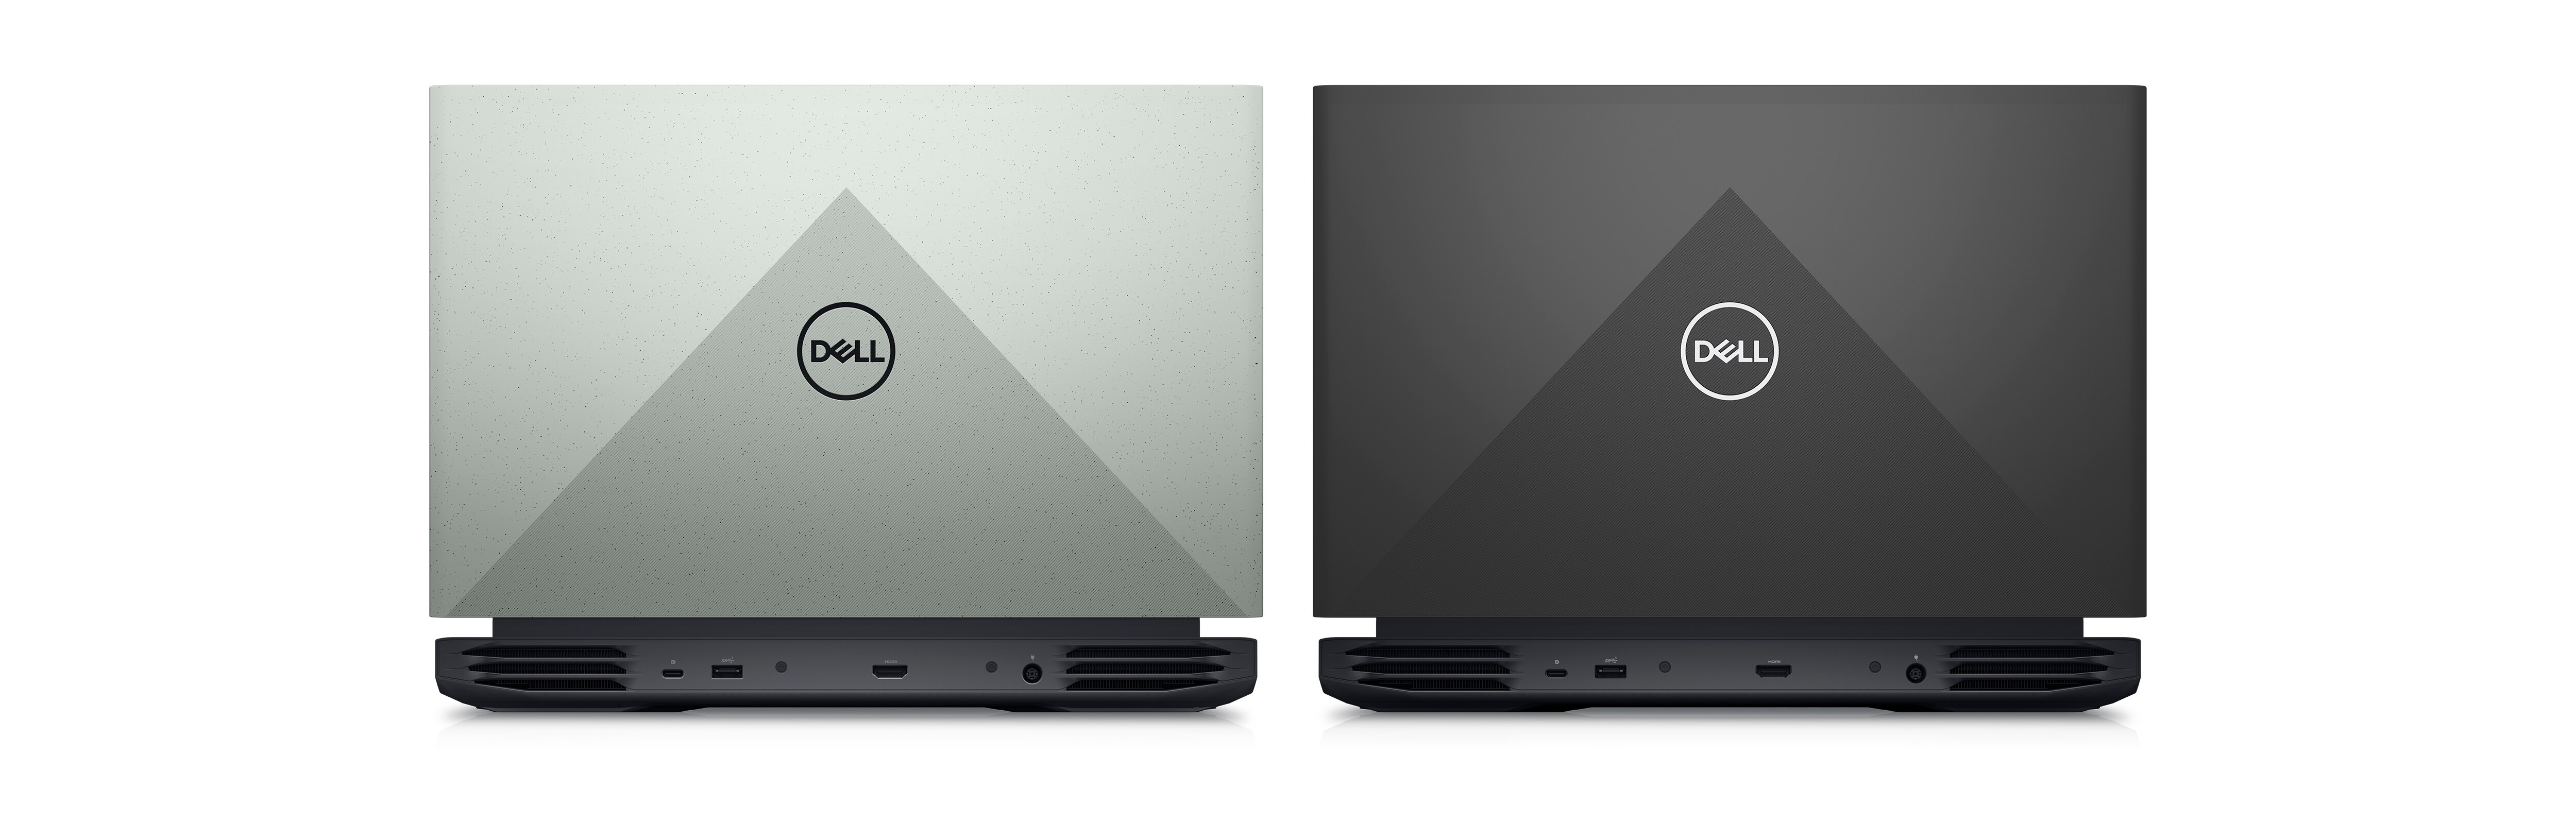 Picture of two Dell G15 5525 Gaming Laptops placed side by side.